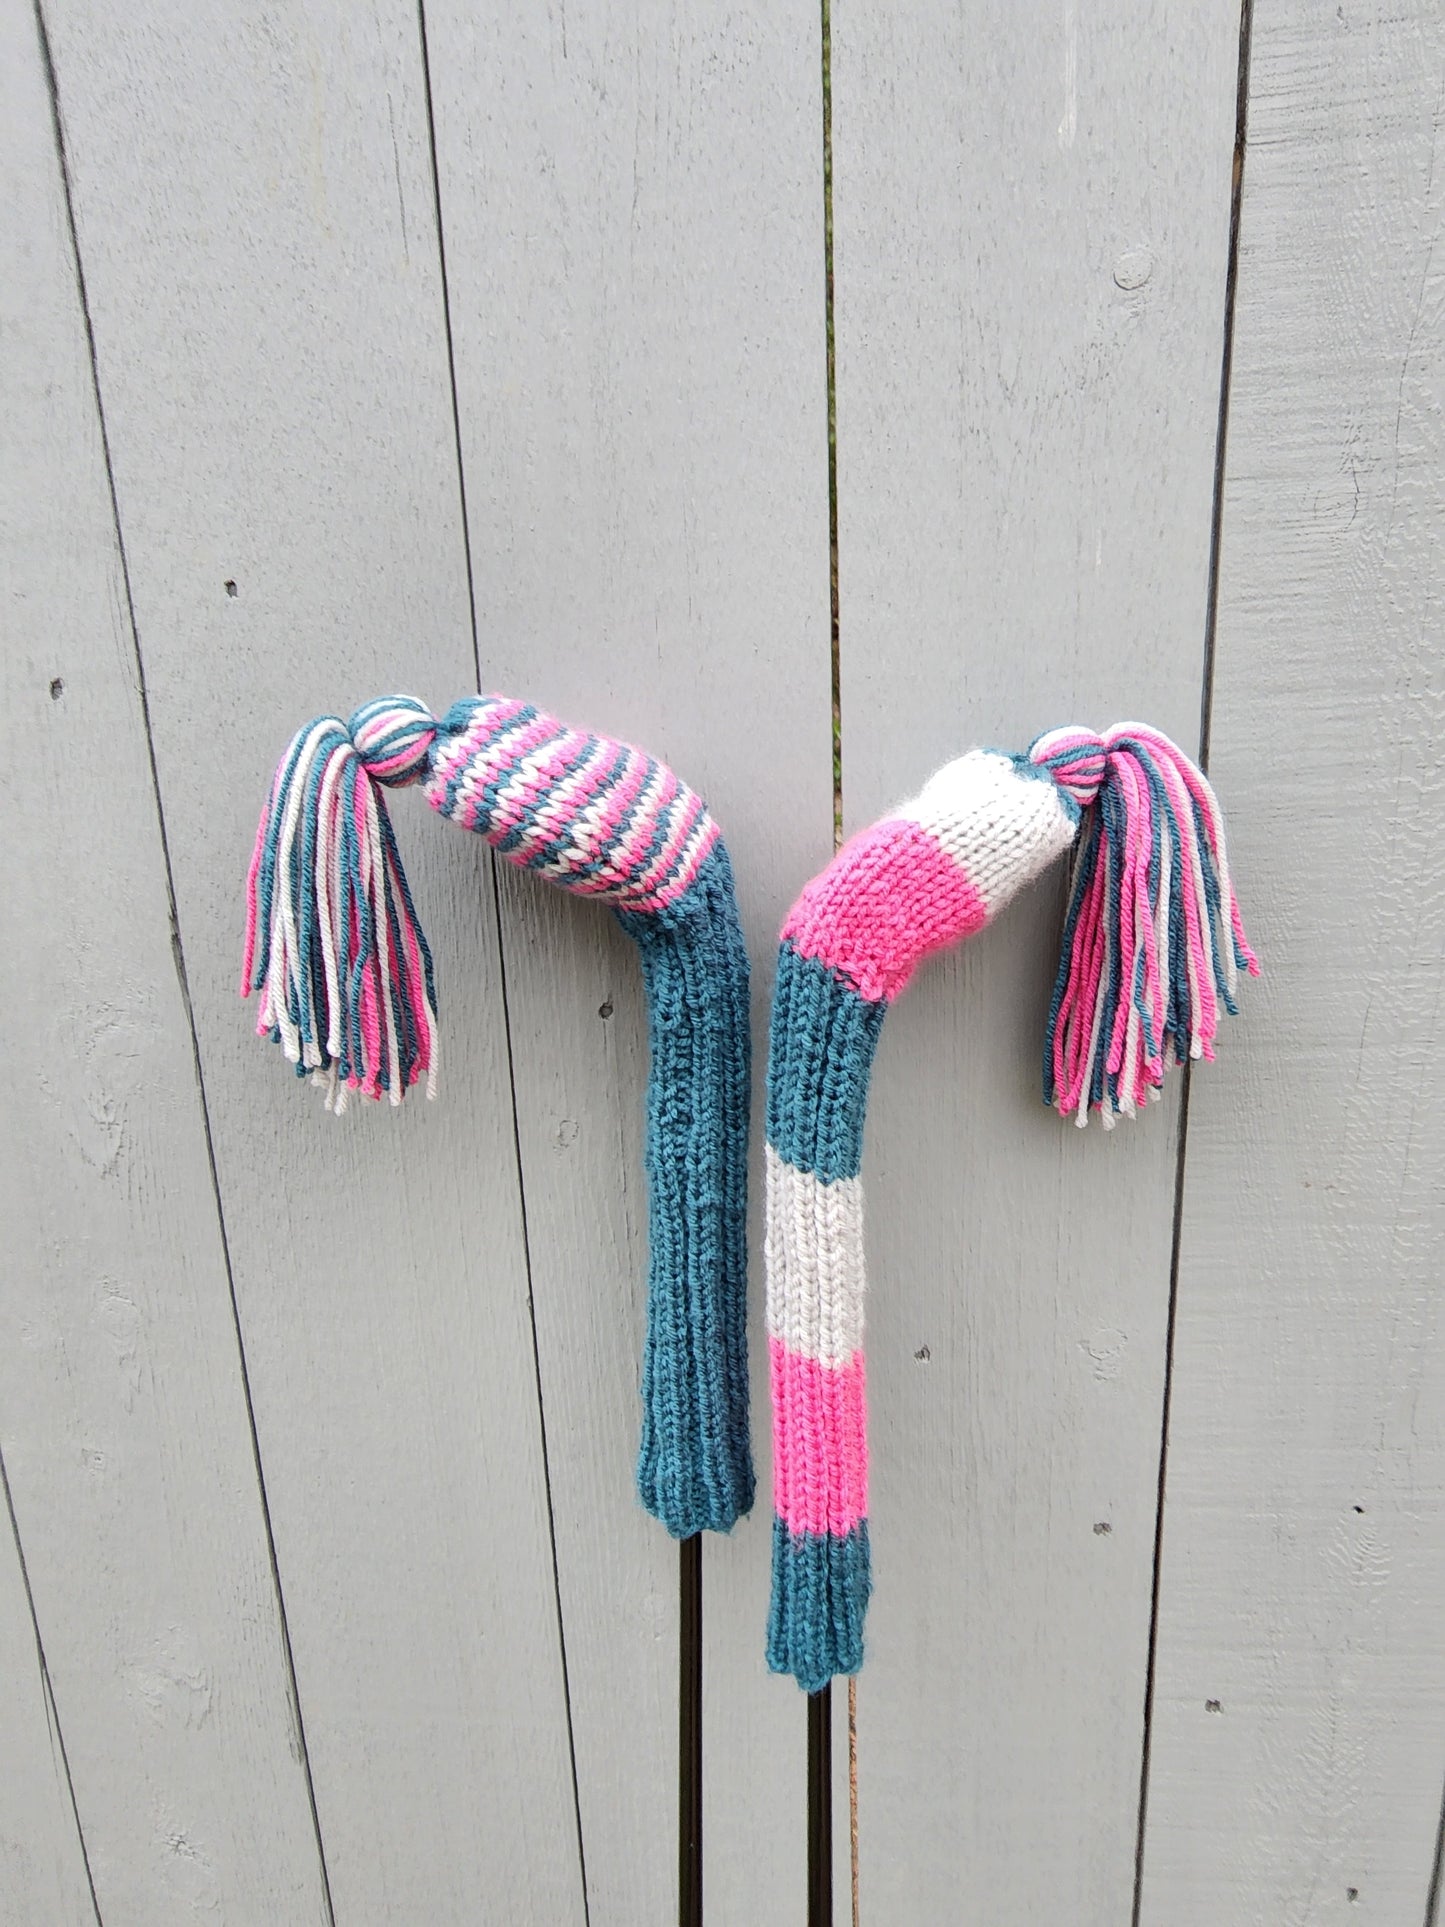 Two Golf Club Head Covers Retro-Vintage Blue, Pink & White with Tassels for Drivers, Woods - Austinknittylimits